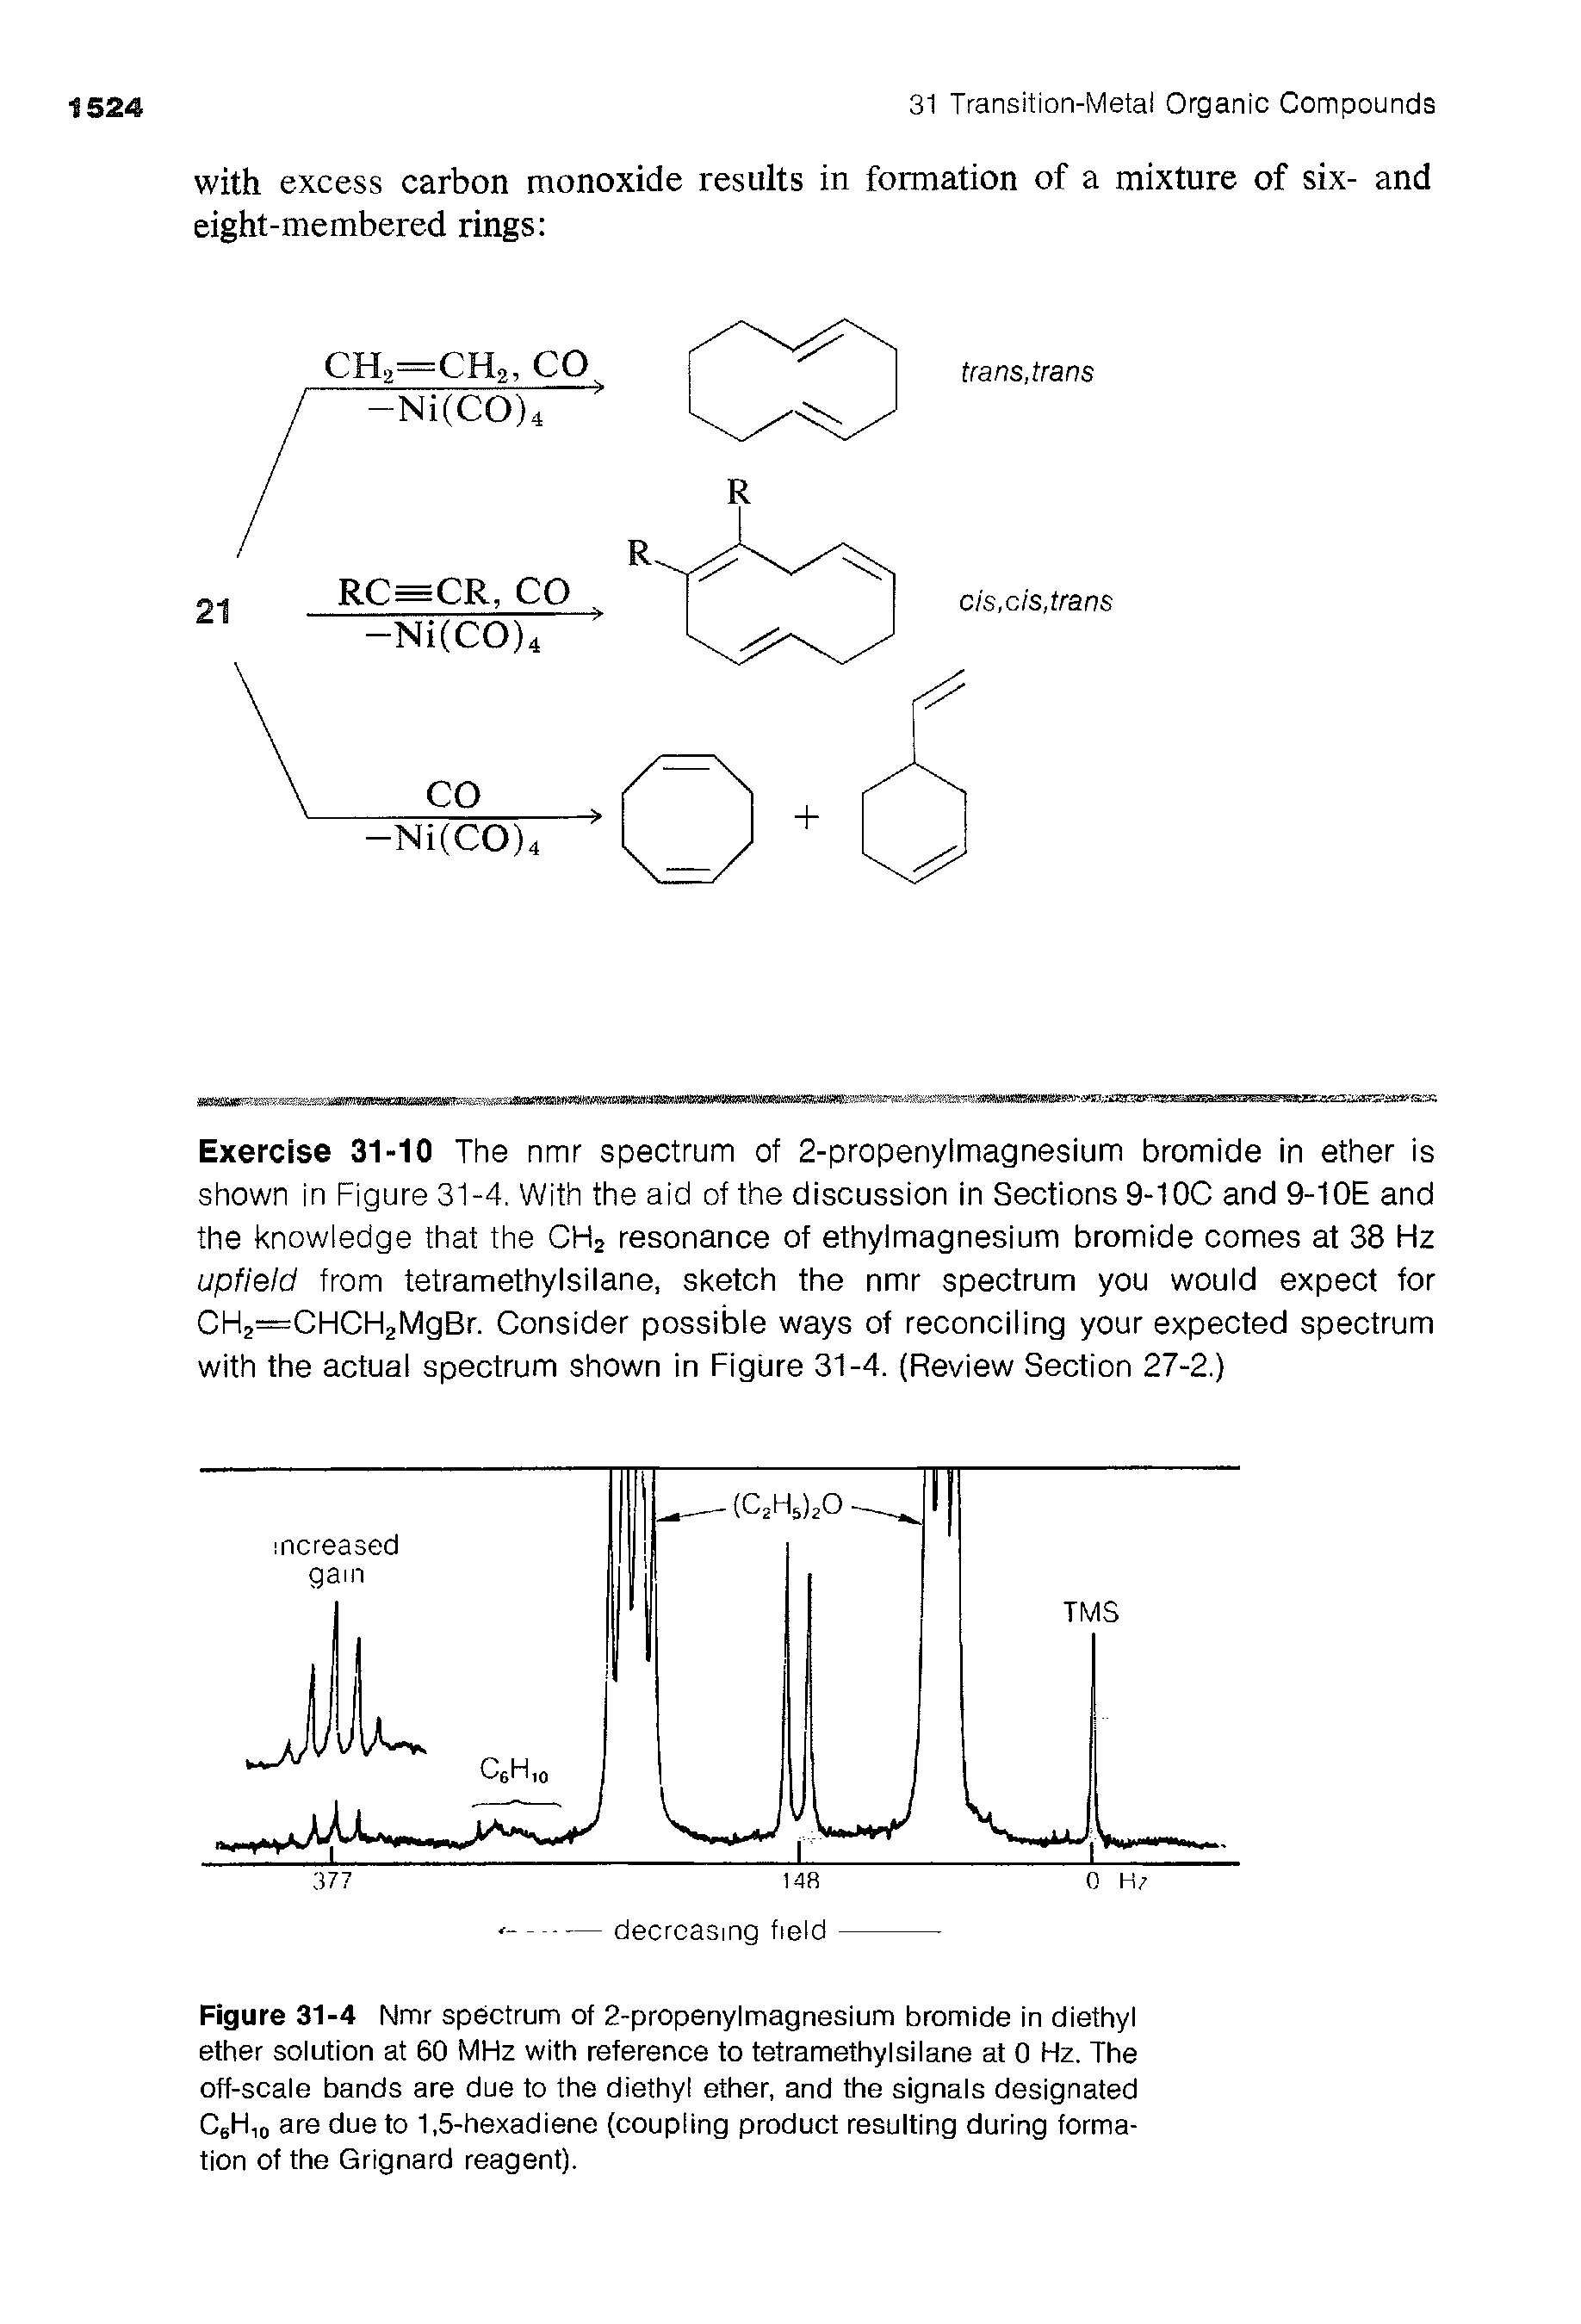 Figure 31-4 Nmr spectrum of 2-propenylmagnesium bromide in diethyl ether solution at 60 MHz with reference to tetramethylsilane at 0 Hz. The off-scale bands are due to the diethyl ether, and the signals designated C6H10 are due to 1,5-hexadiene (coupling product resulting during formation of the Grignard reagent).